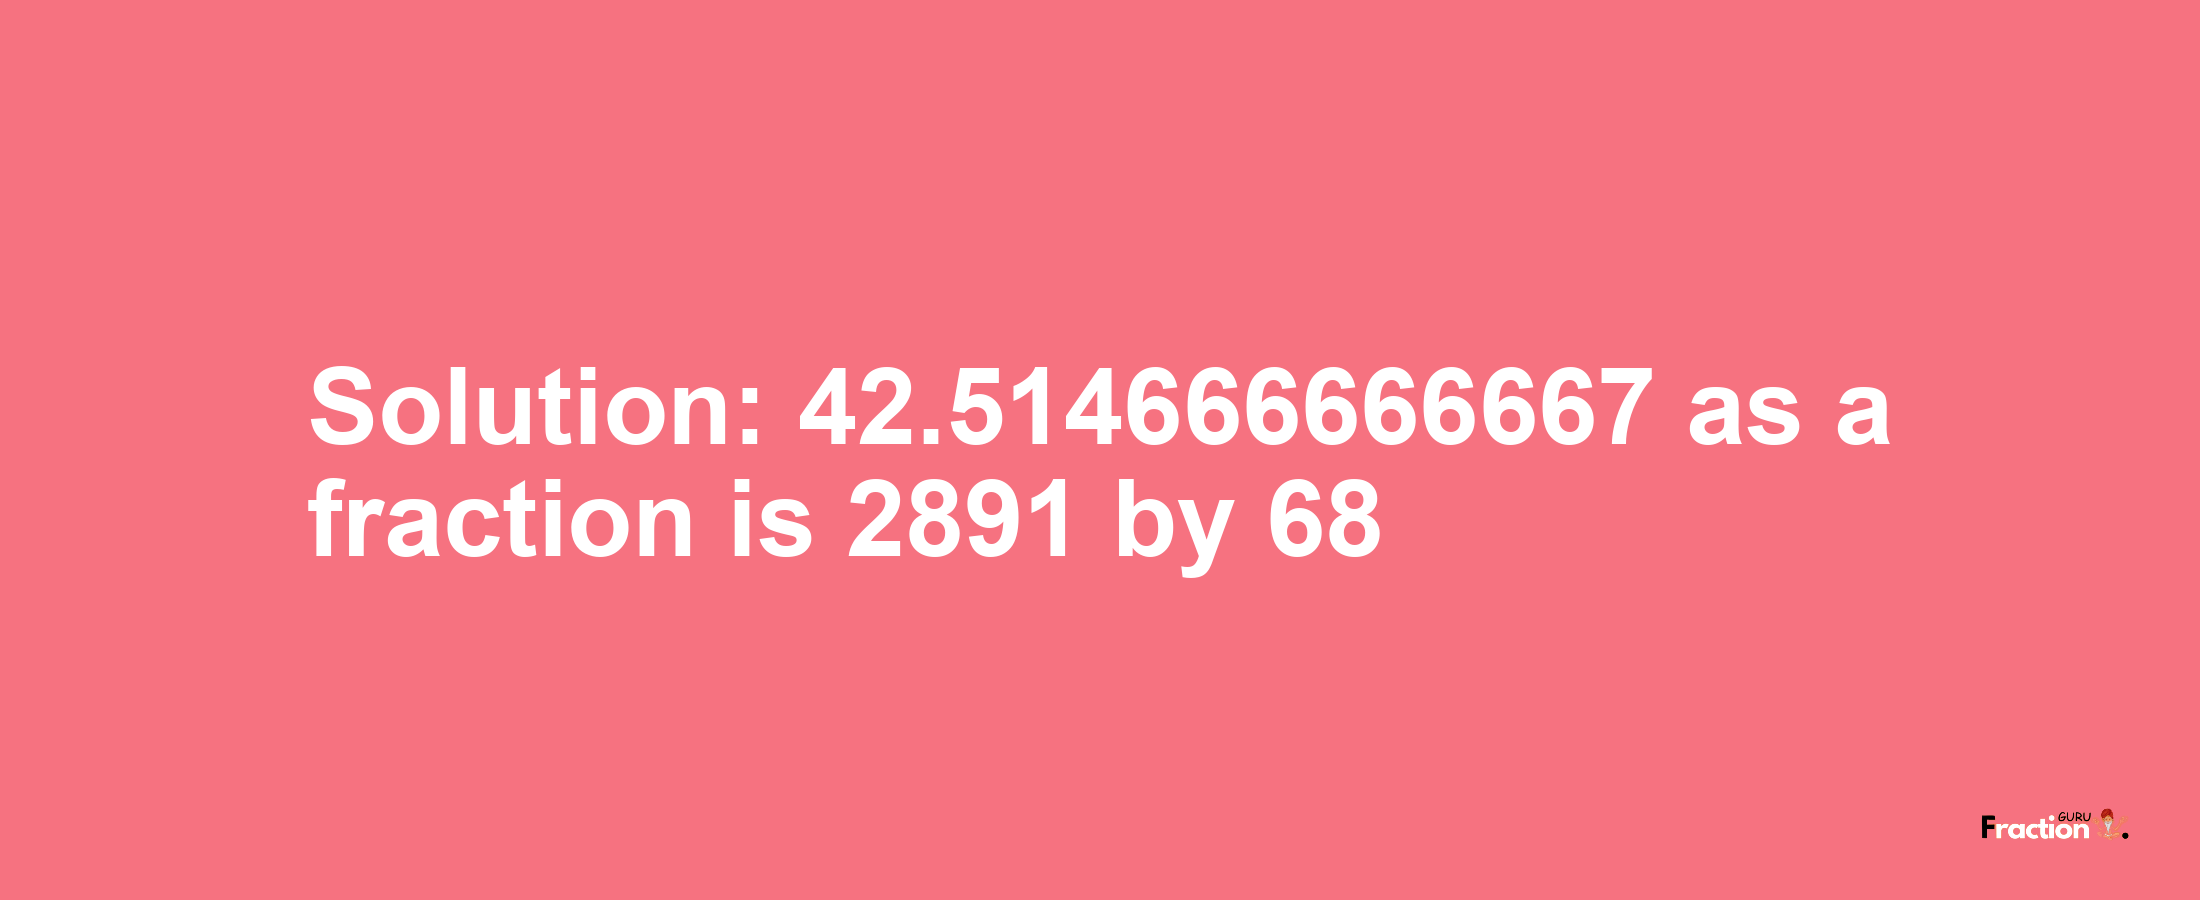 Solution:42.514666666667 as a fraction is 2891/68